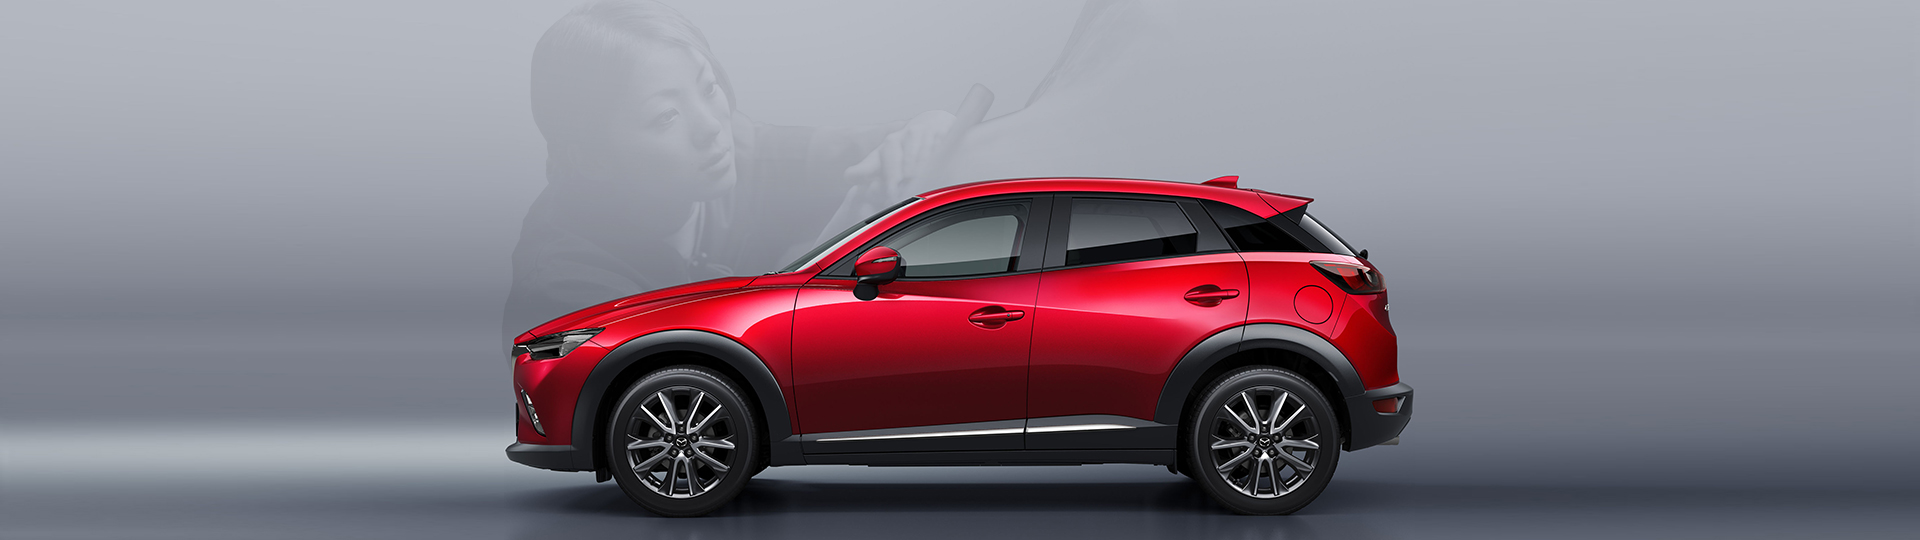 HD Quality Wallpaper | Collection: Vehicles, 1920x540 Mazda CX-3